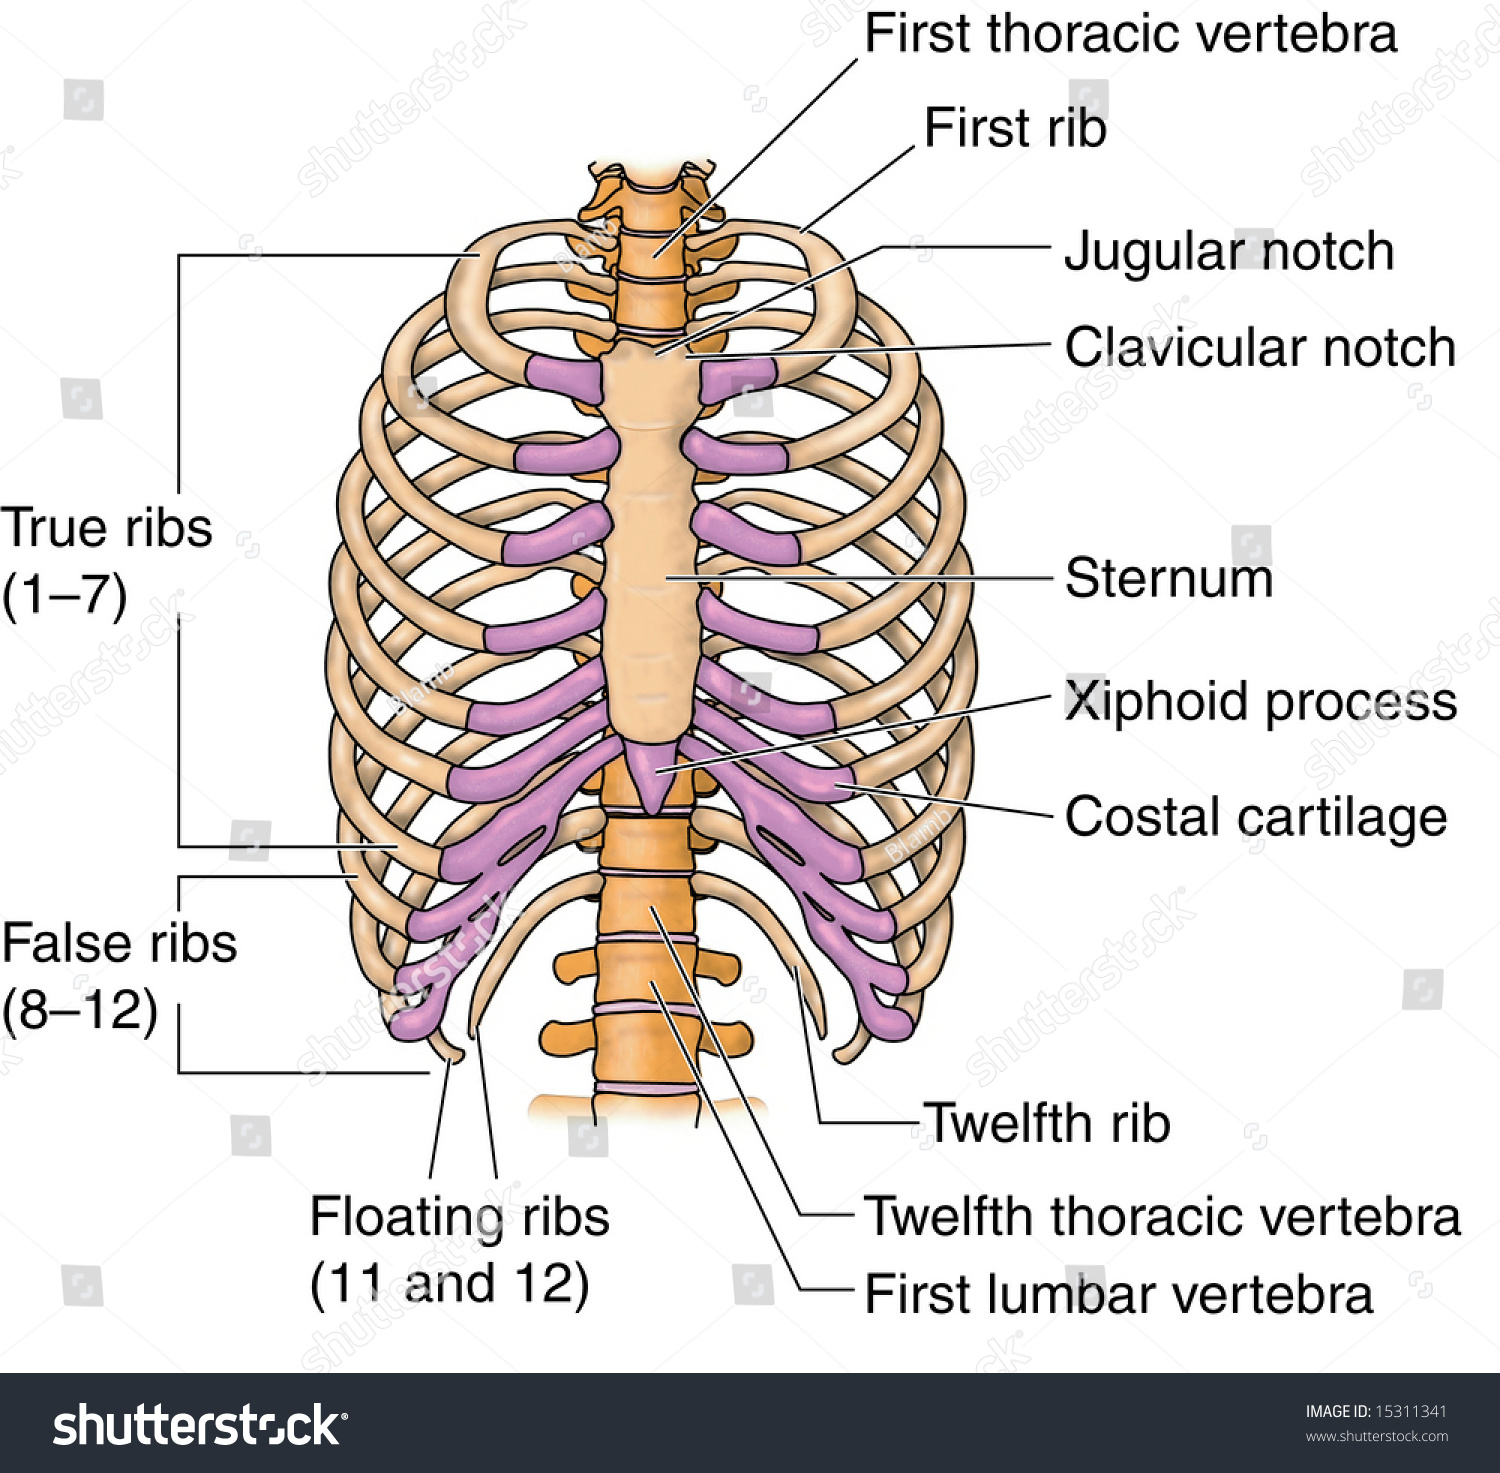 Rib cage labeled